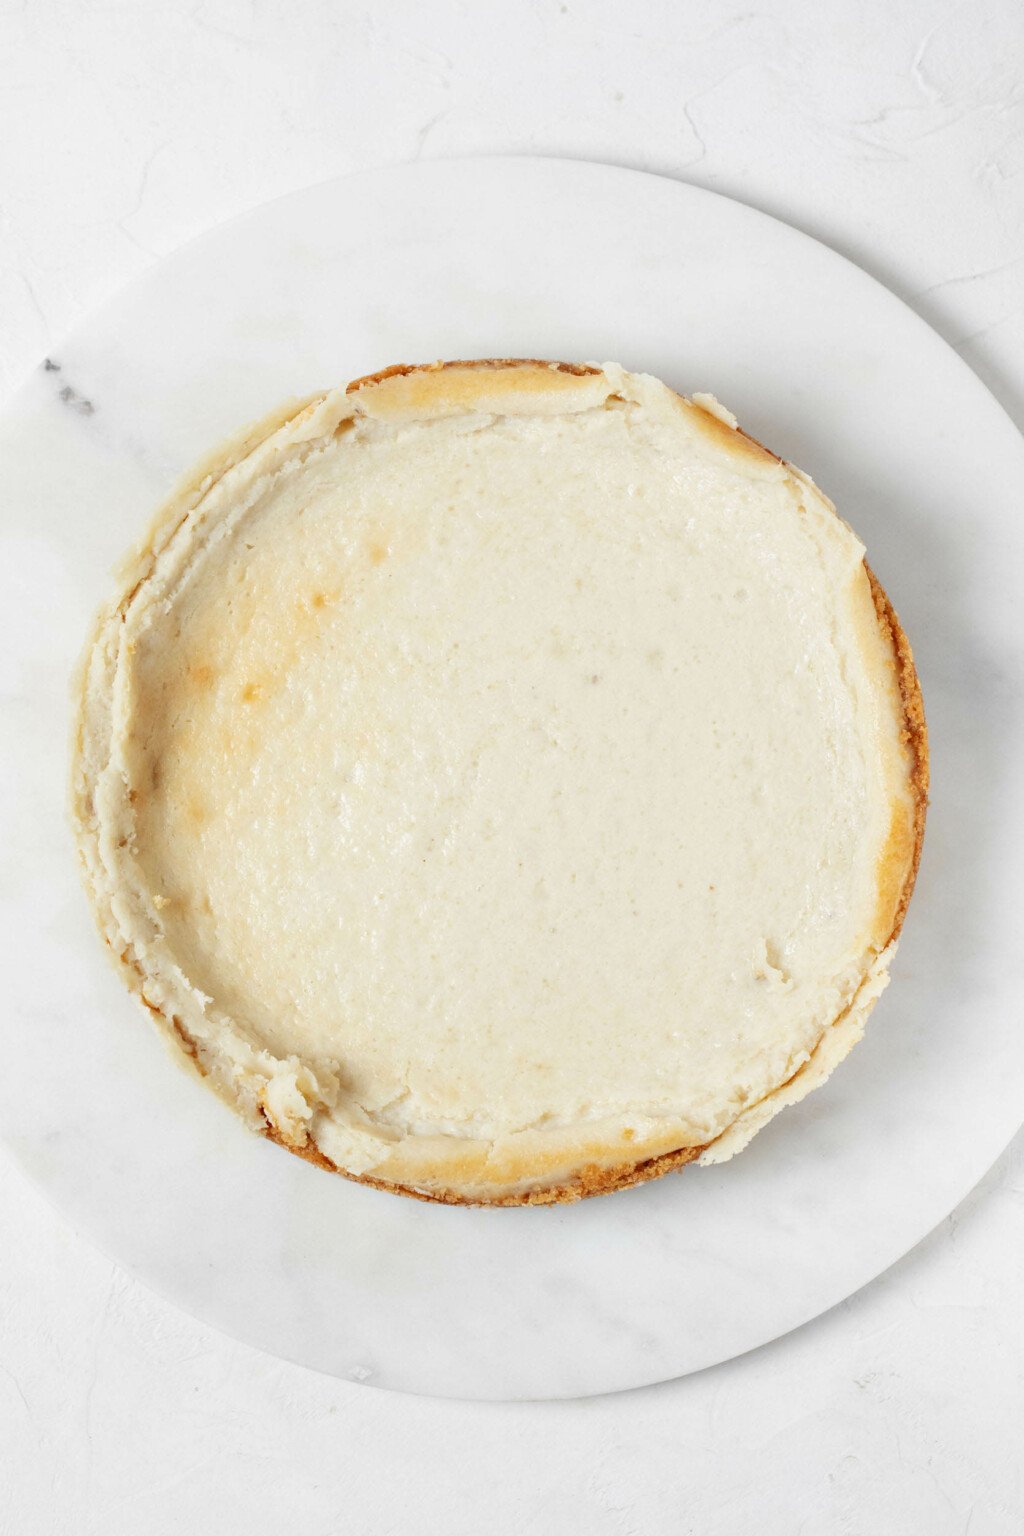 A round, white platter holds a freshly baked vegan cheesecake.